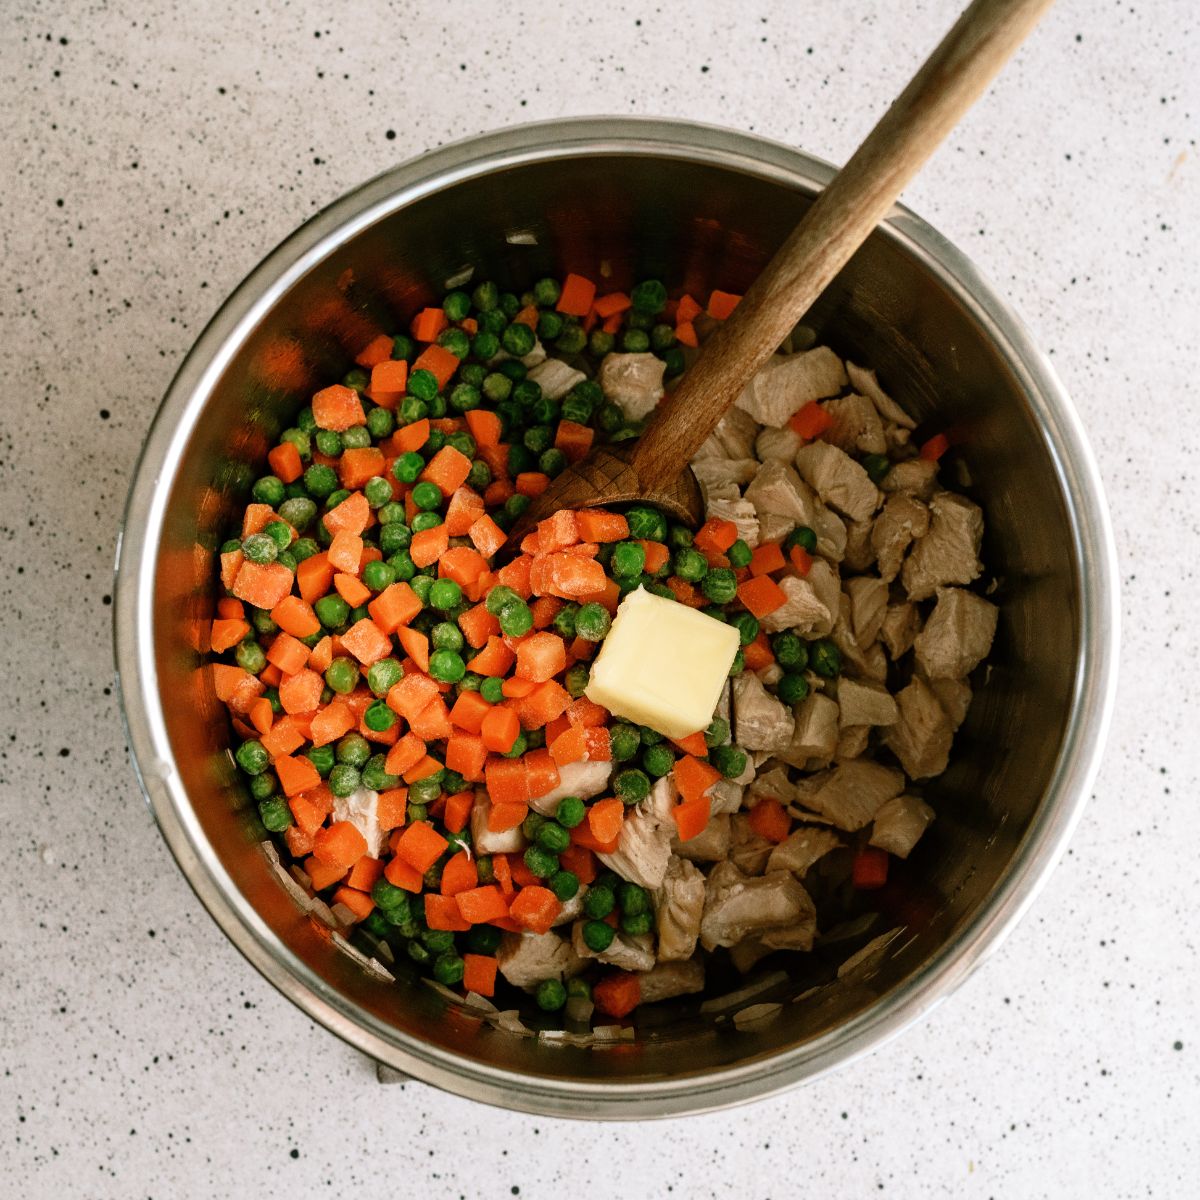 Vegetables and chicken in the Instant Pot